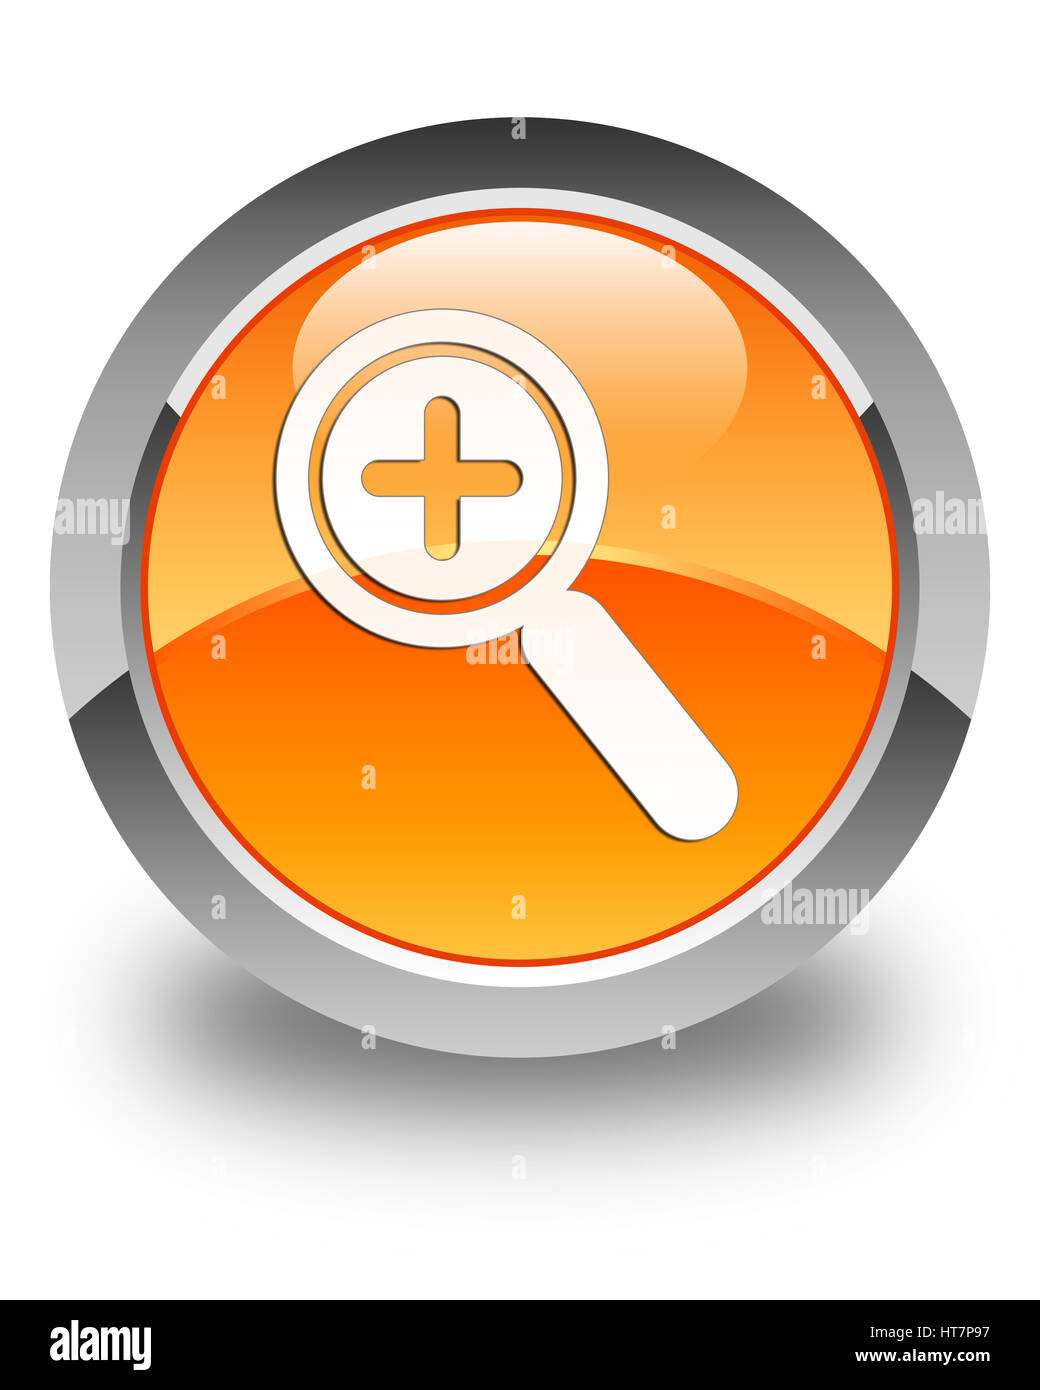 Zoom in icon isolated on glossy orange round button abstract illustration Stock Photo